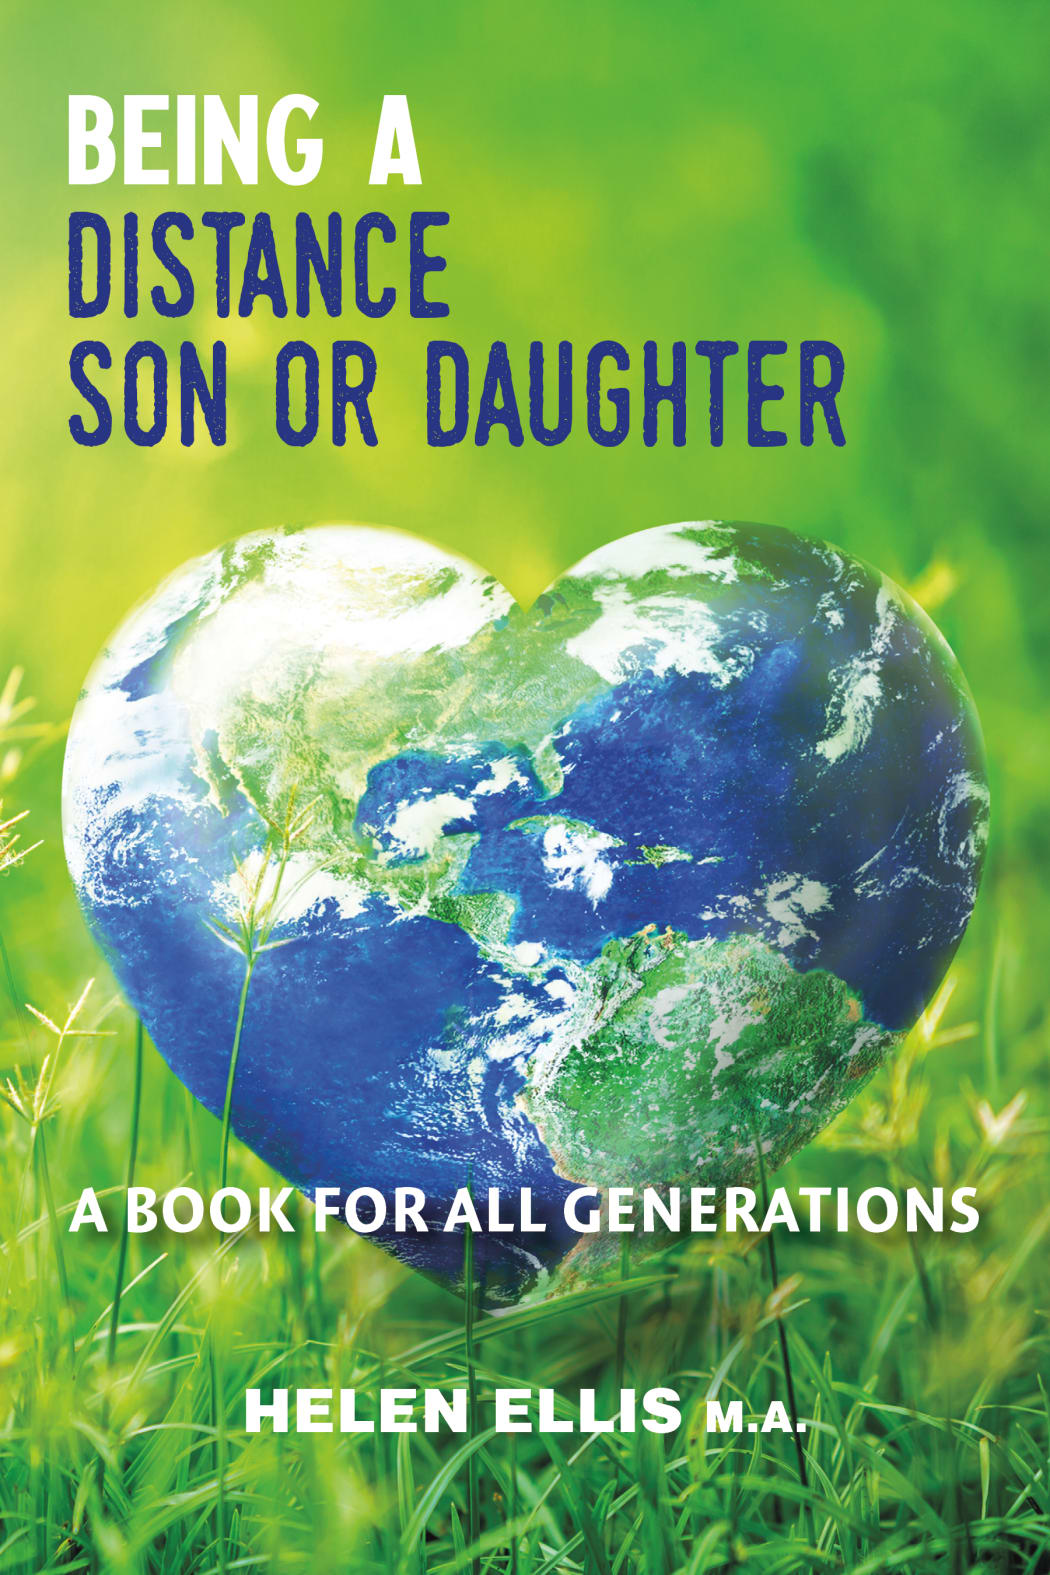 Being a Distance Son or Daughter
by Helen Ellis, M.A